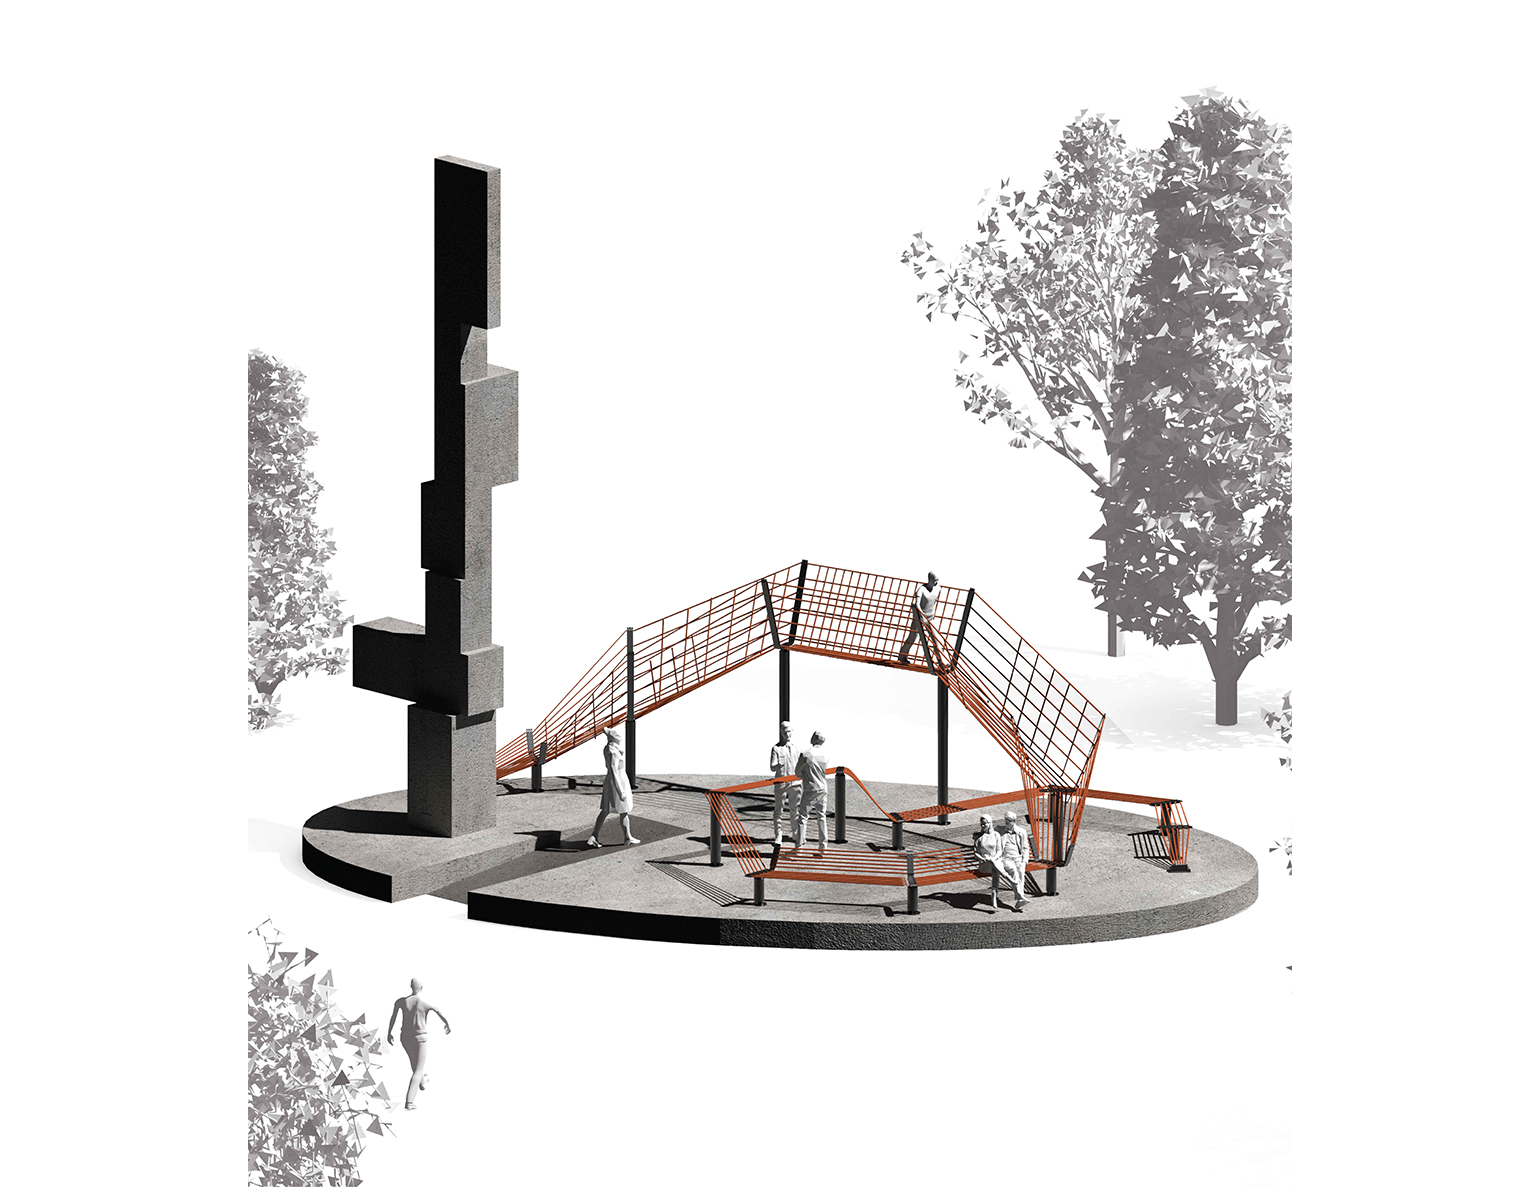 A conceptual design of a playground with a geometric structure and figures interacting with the equipment, set against a backdrop of trees.